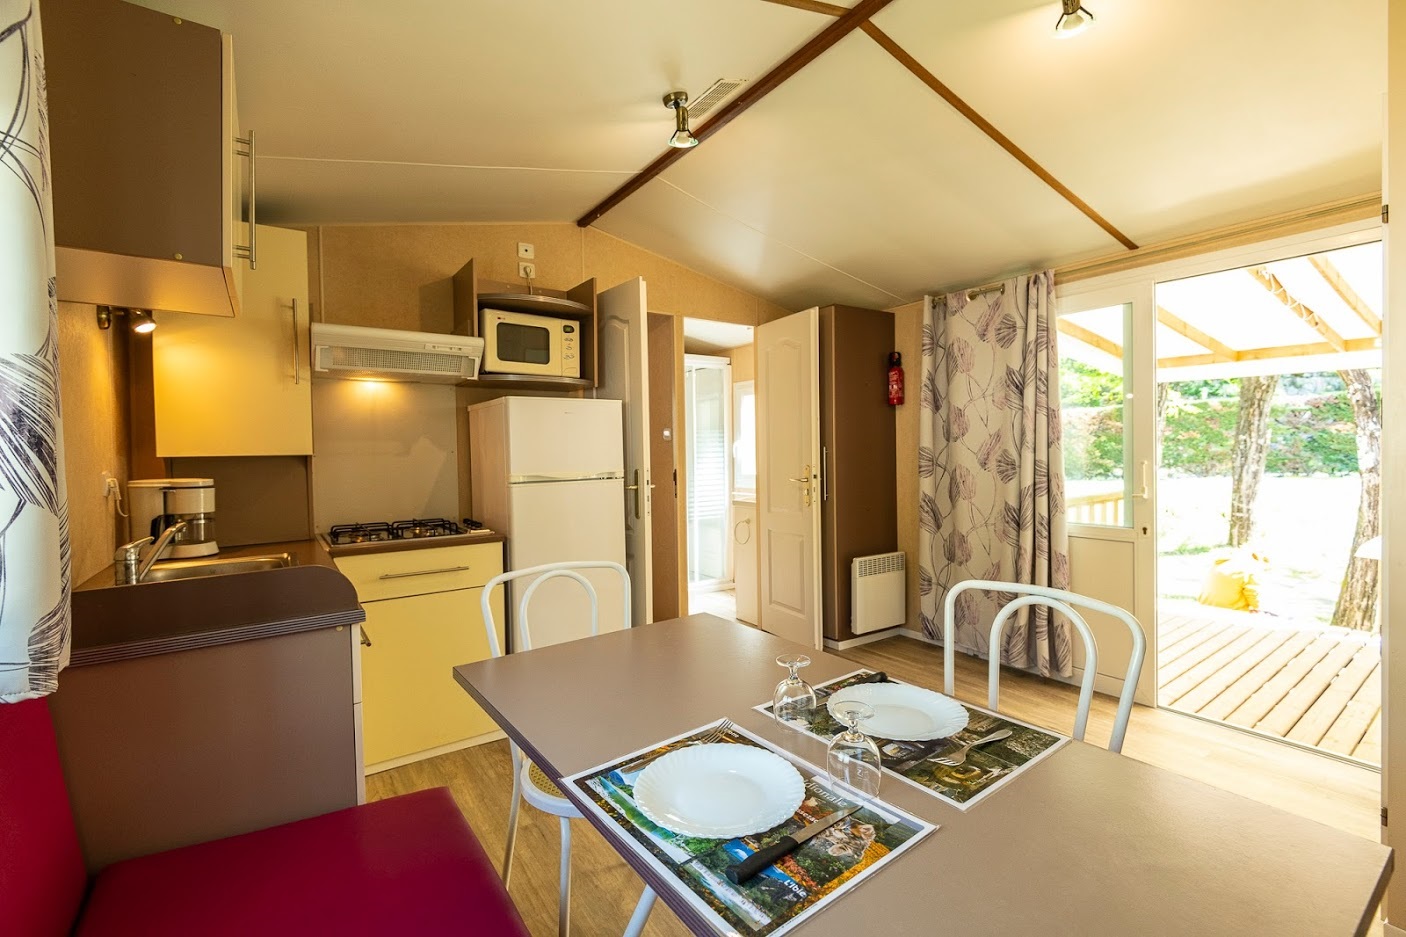 Accommodation - Mobilhome 2 Bedrooms Air-Conditioning - Camping Domaine Arleblanc